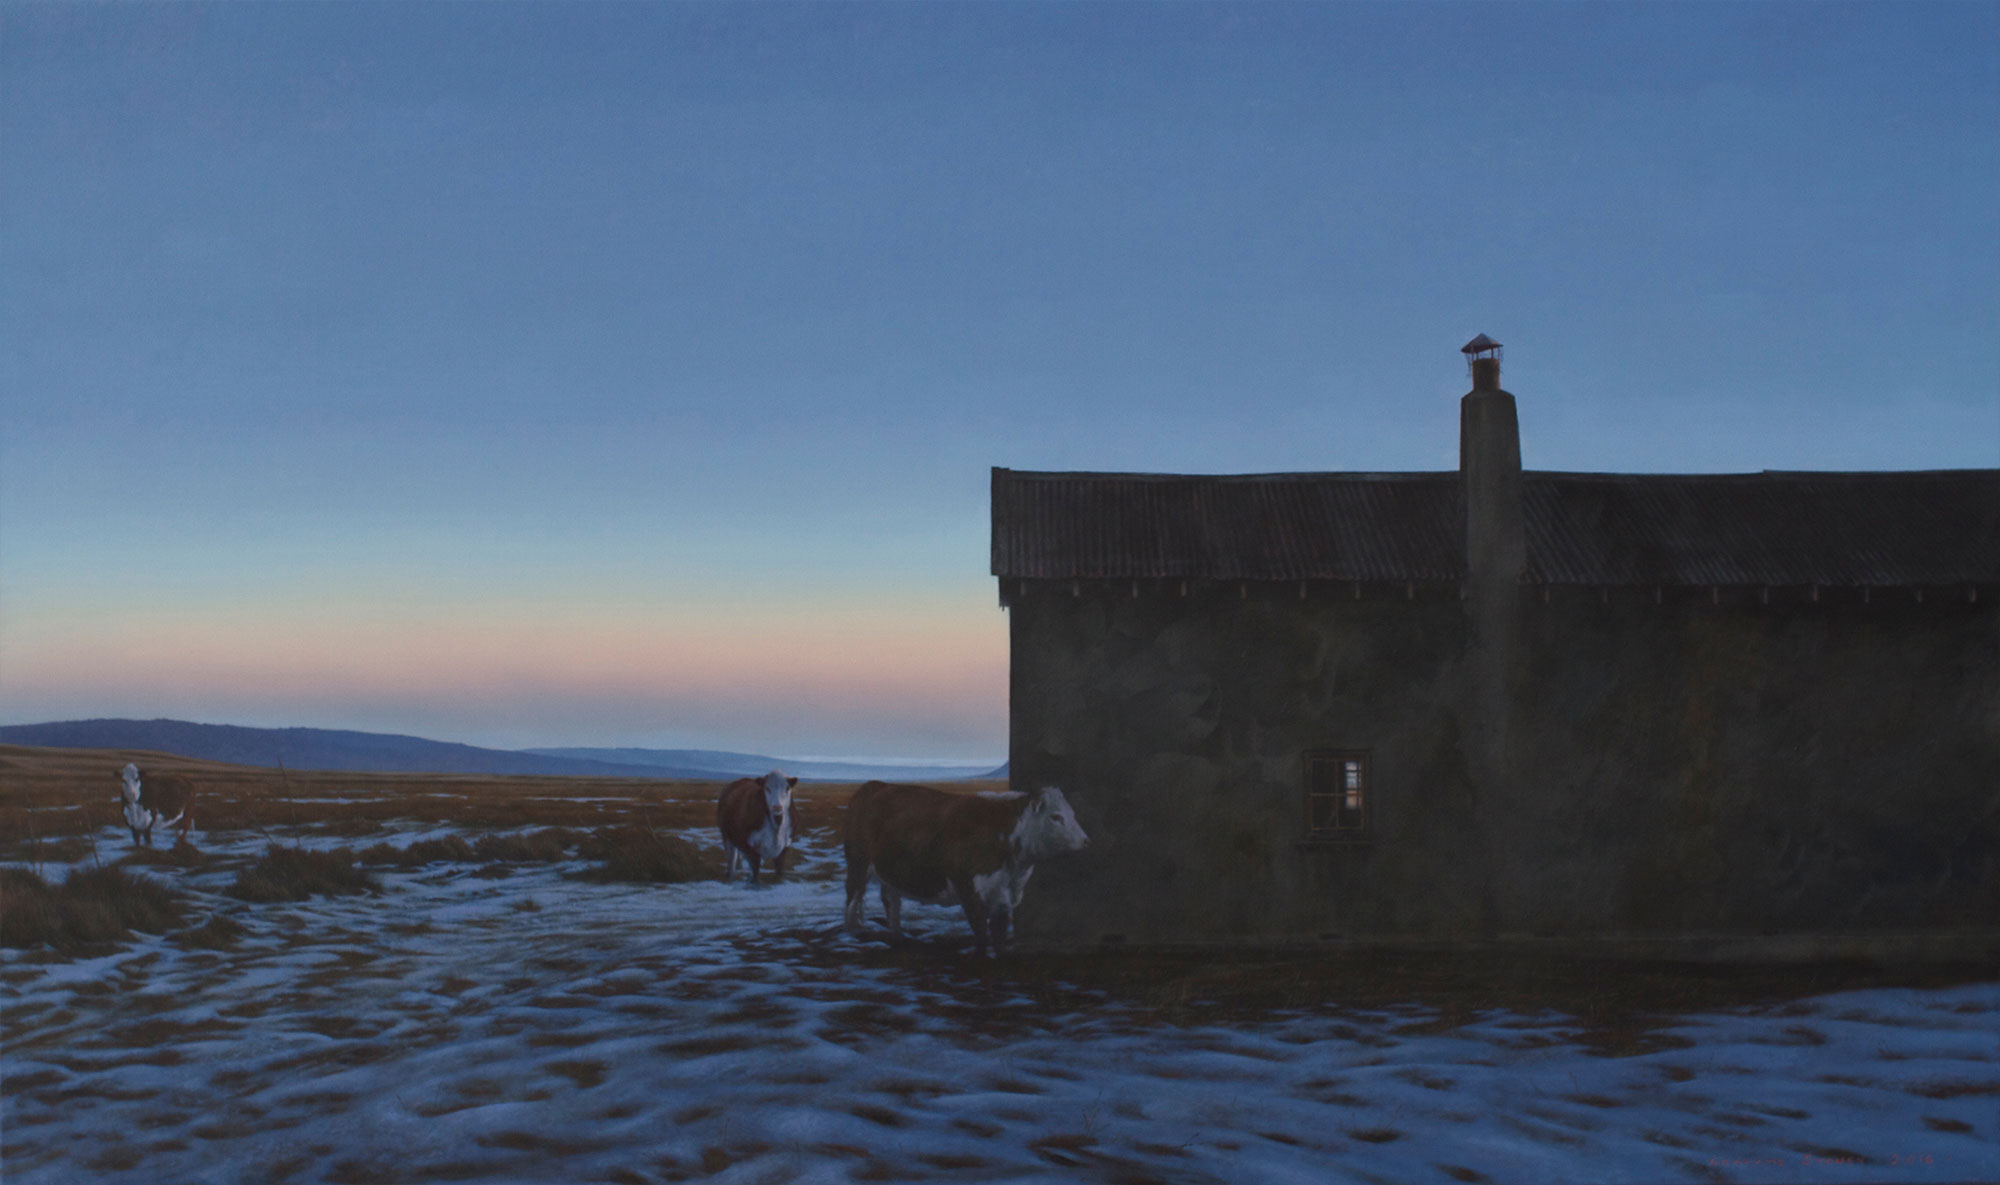 Dusk at the Shearer’s Kitchen. Oil on Linen. 610 x 1220 mm. 2016. Private Collection.